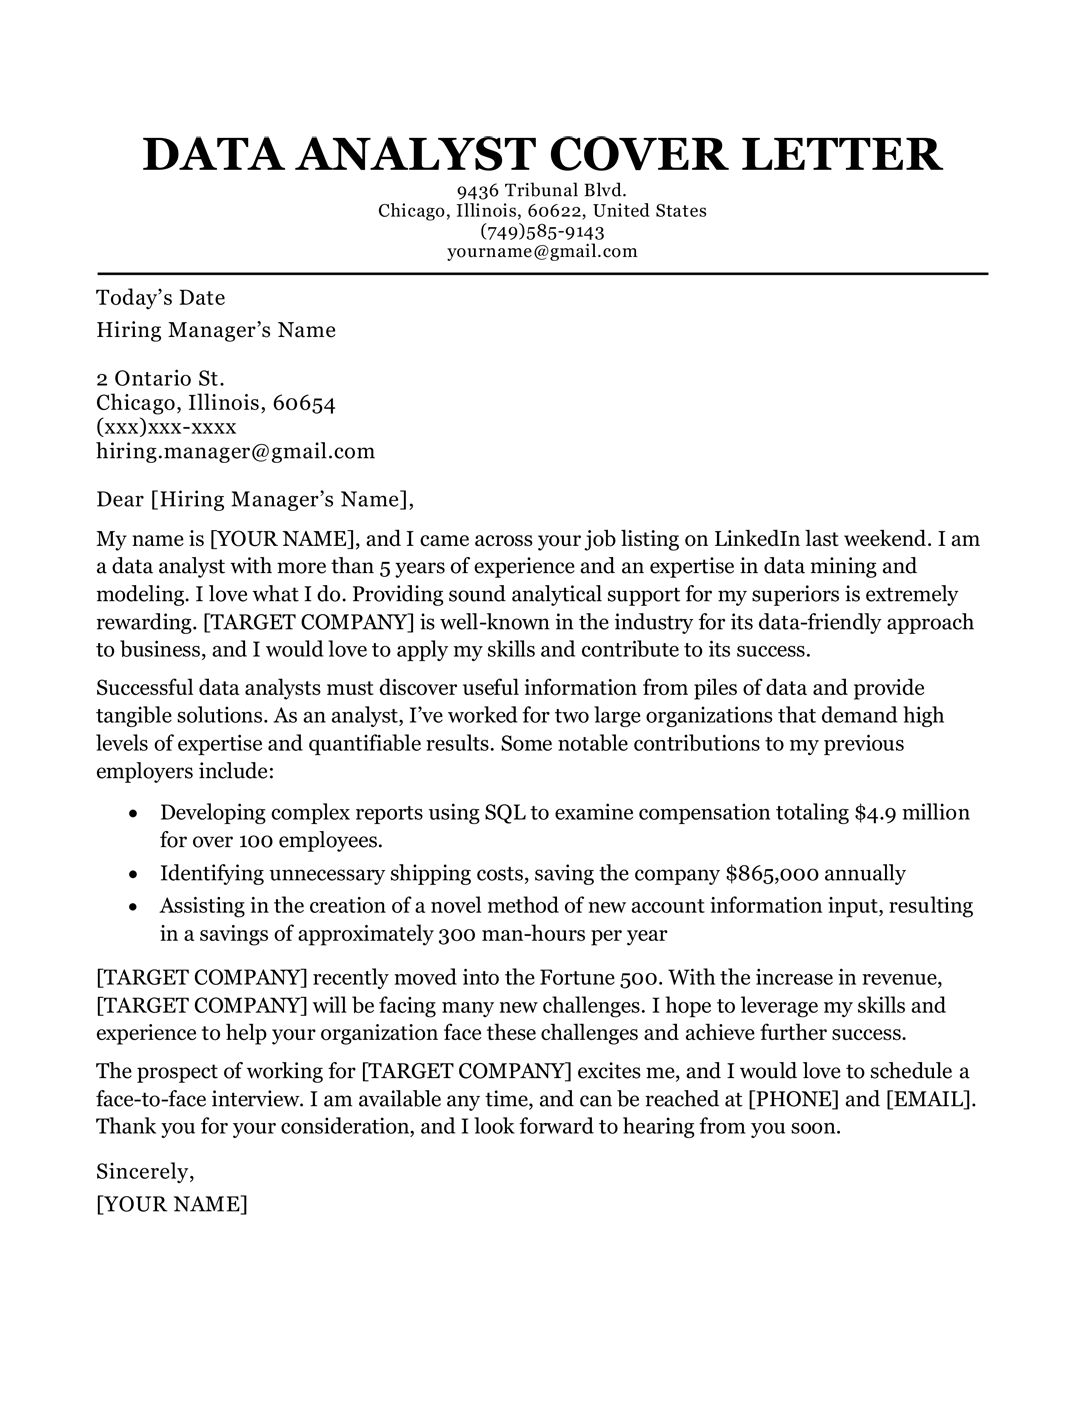 Career Switch Cover Letter from resumecompanion.com